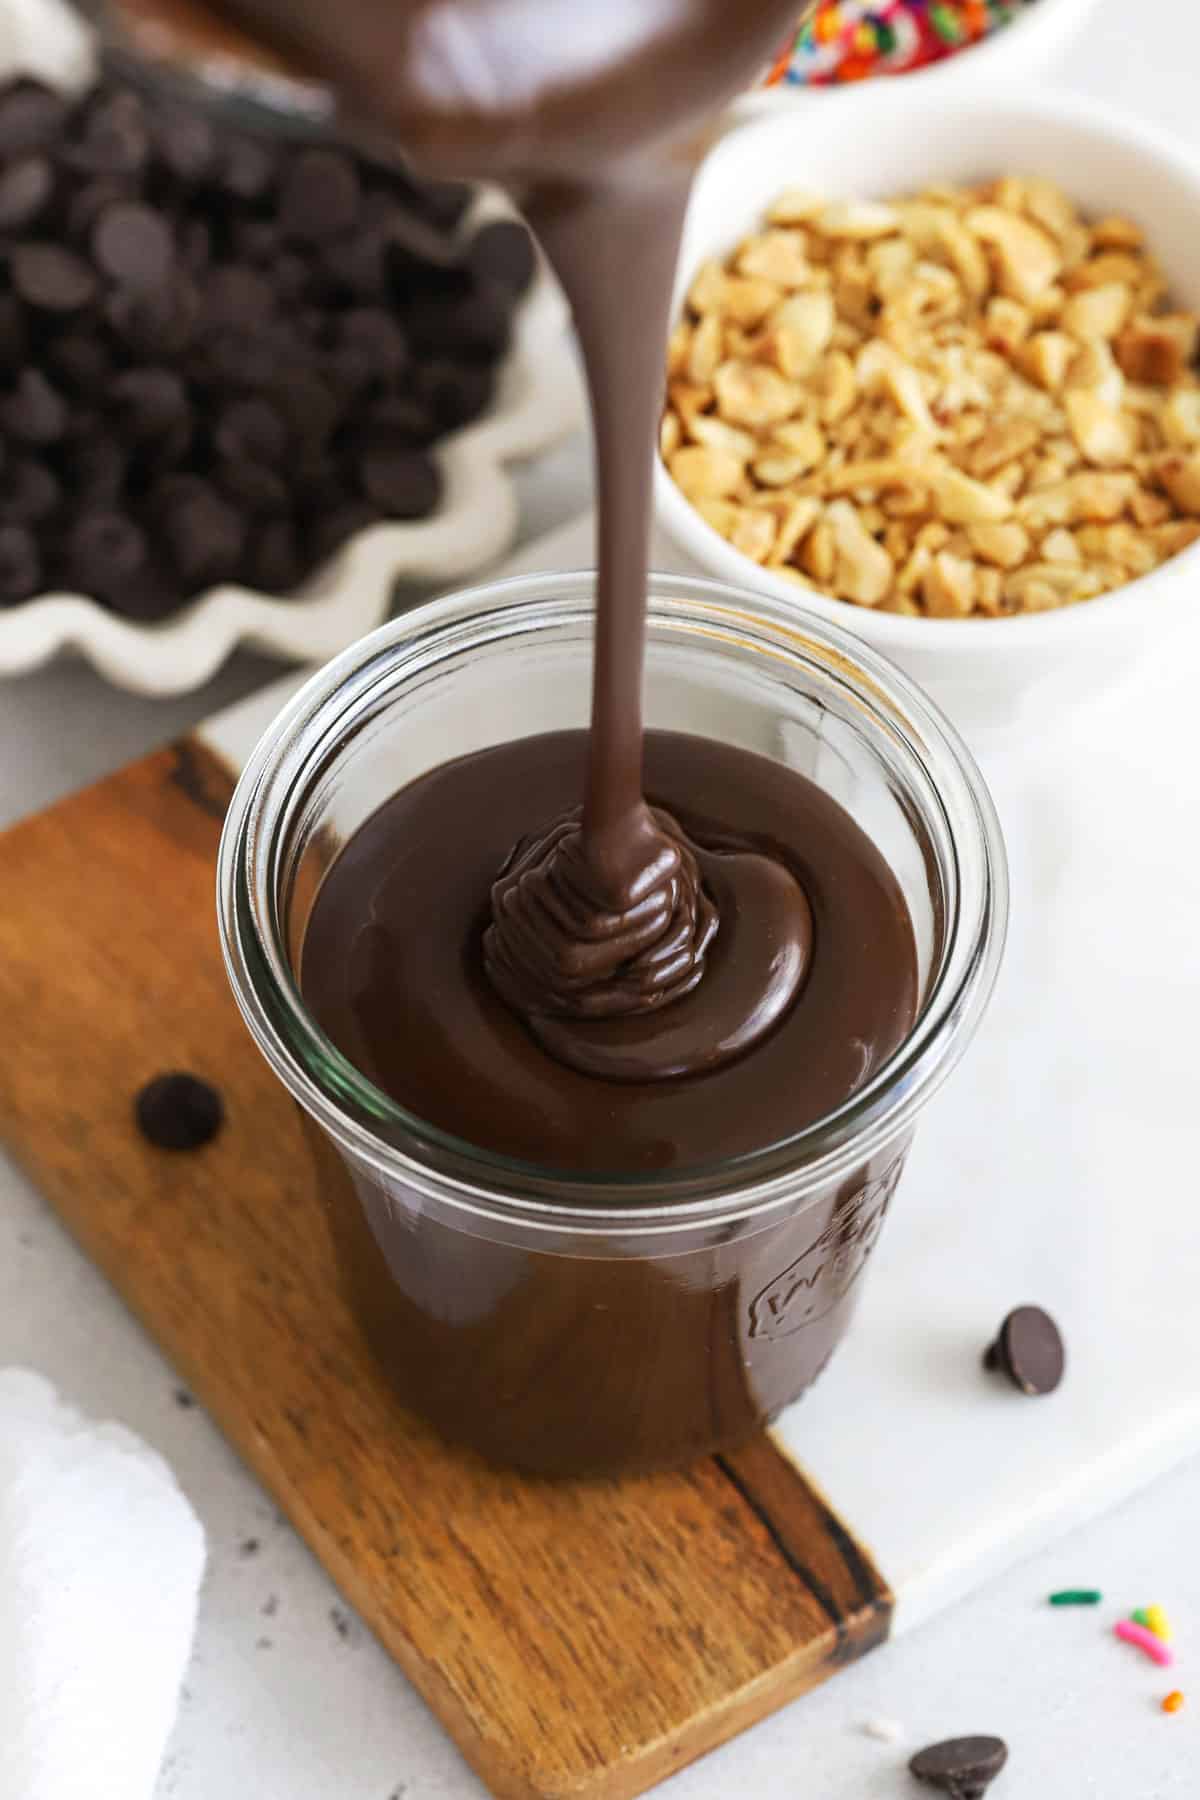 Our easy hot fudge recipe is made with NO corn syrup, but still gives you the thick, glossy texture you're looking for. To make it without corn syrup, we make our homemade hot fudge sauce with sweetened condensed milk, heavy cream, butter, chocolate, vanilla, and salt. Yum! This old-fashioned hot fudge sauce is rich, chocolatey and perfect for making hot fudge sundaes and ice cream cake. It's one of our favorite ice cream bar toppings for summer! (It's even gluten-free!)